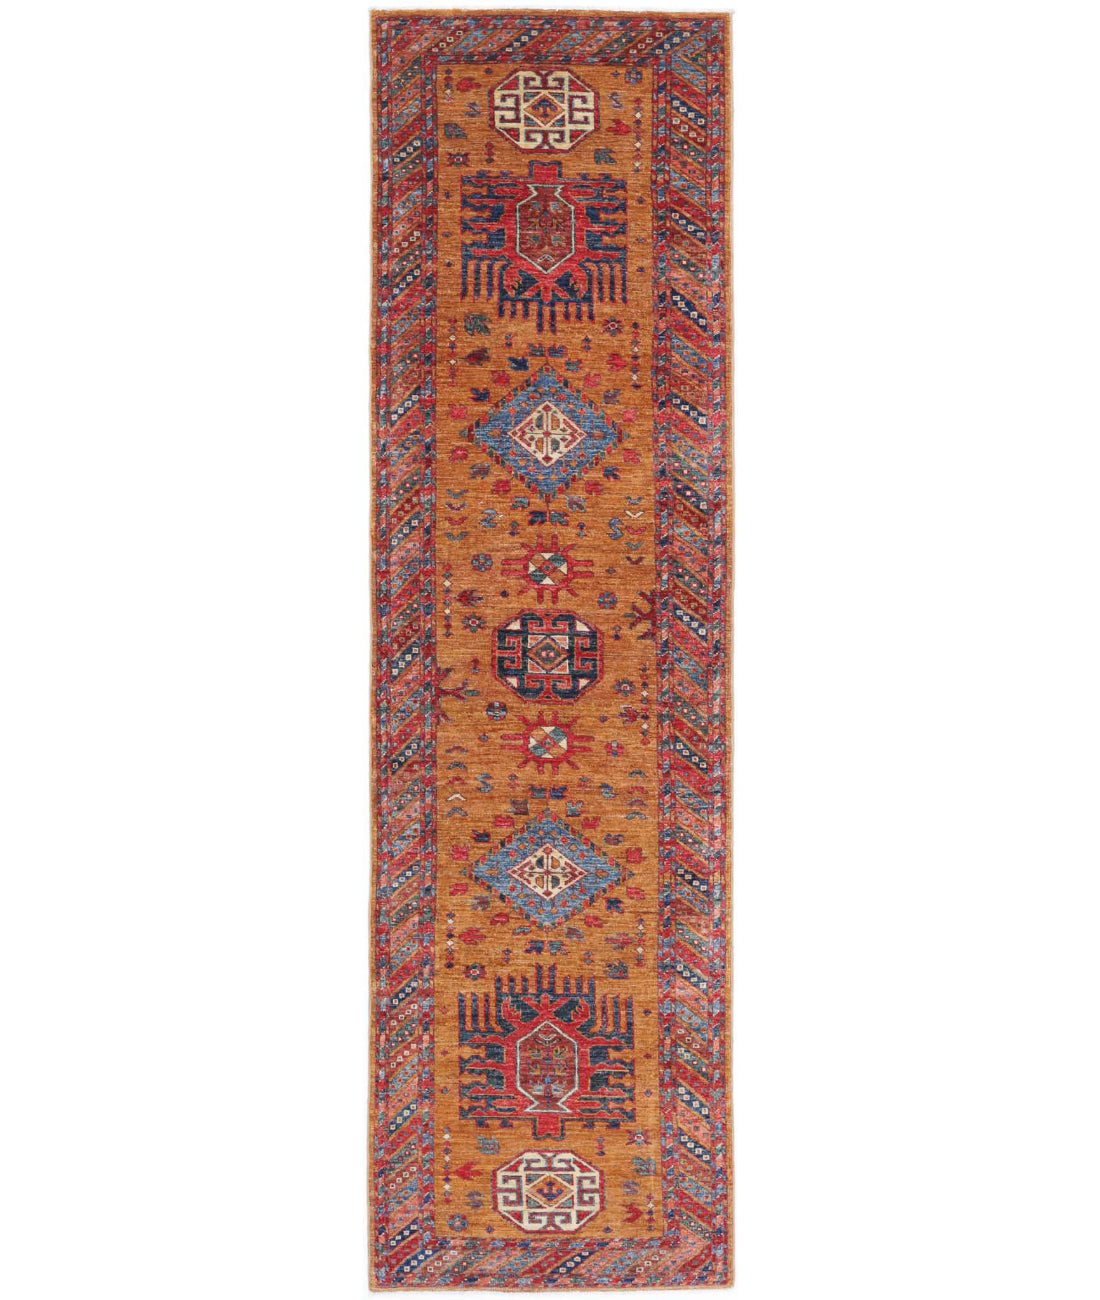 Hand Knotted Nomadic Caucasian Humna Wool Rug - 2&#39;8&#39;&#39; x 9&#39;6&#39;&#39; 2&#39;8&#39;&#39; x 9&#39;6&#39;&#39; (80 X 285) / Gold / Multi